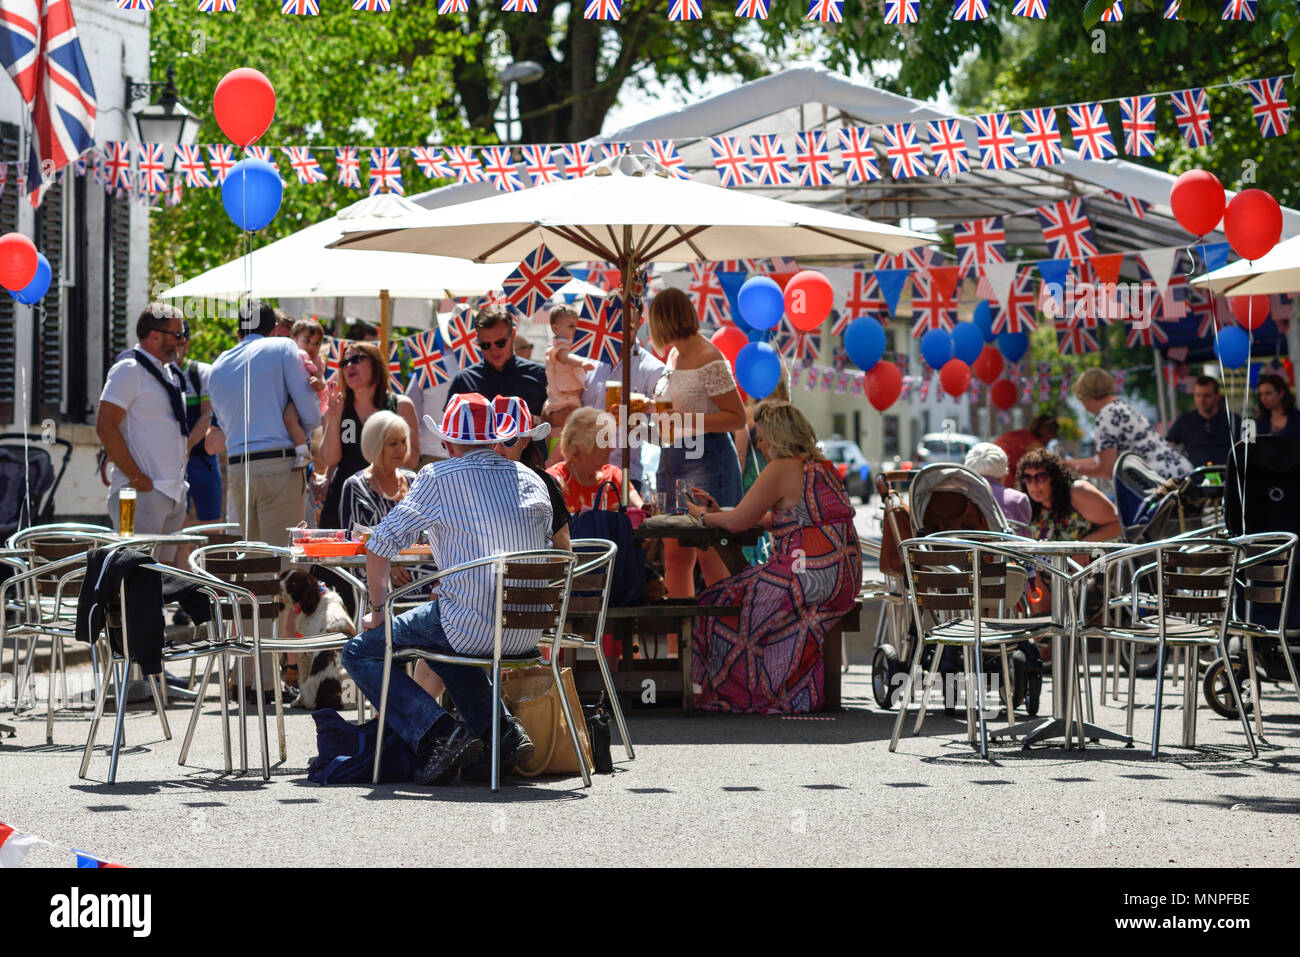 Orston, Nottinghamshire, UK: 19th May 2018. Villagers in the Nottinghamshire village of Orston celebrate with a street party and church service the royal wedding of Prince Harry and Meghan Markle. Credit: Ian Francis/Alamy Live News Credit: Ian Francis/Alamy Live News Stock Photo